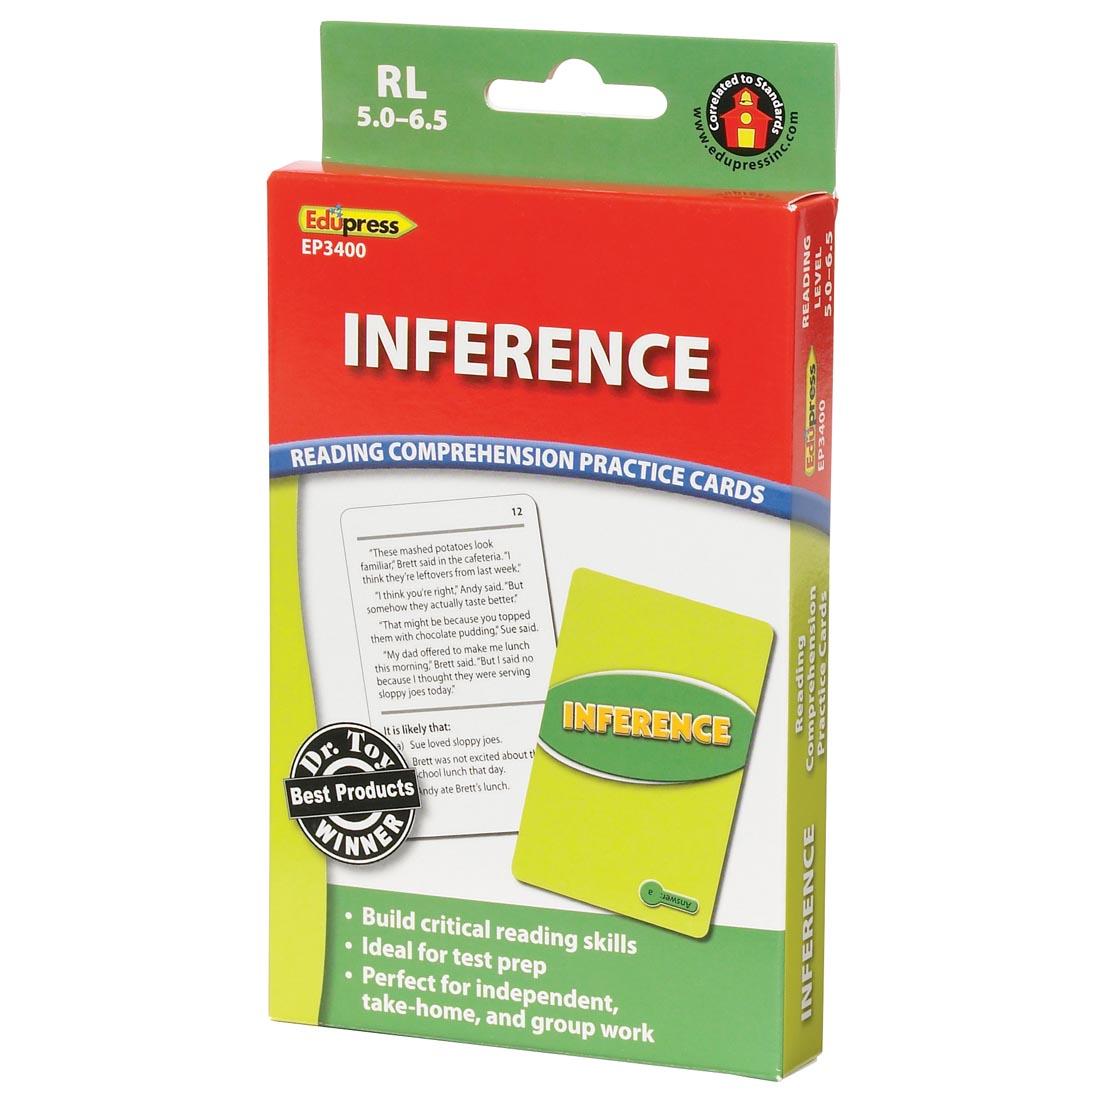 Green Level Inference Reading Comprehension Practice Cards